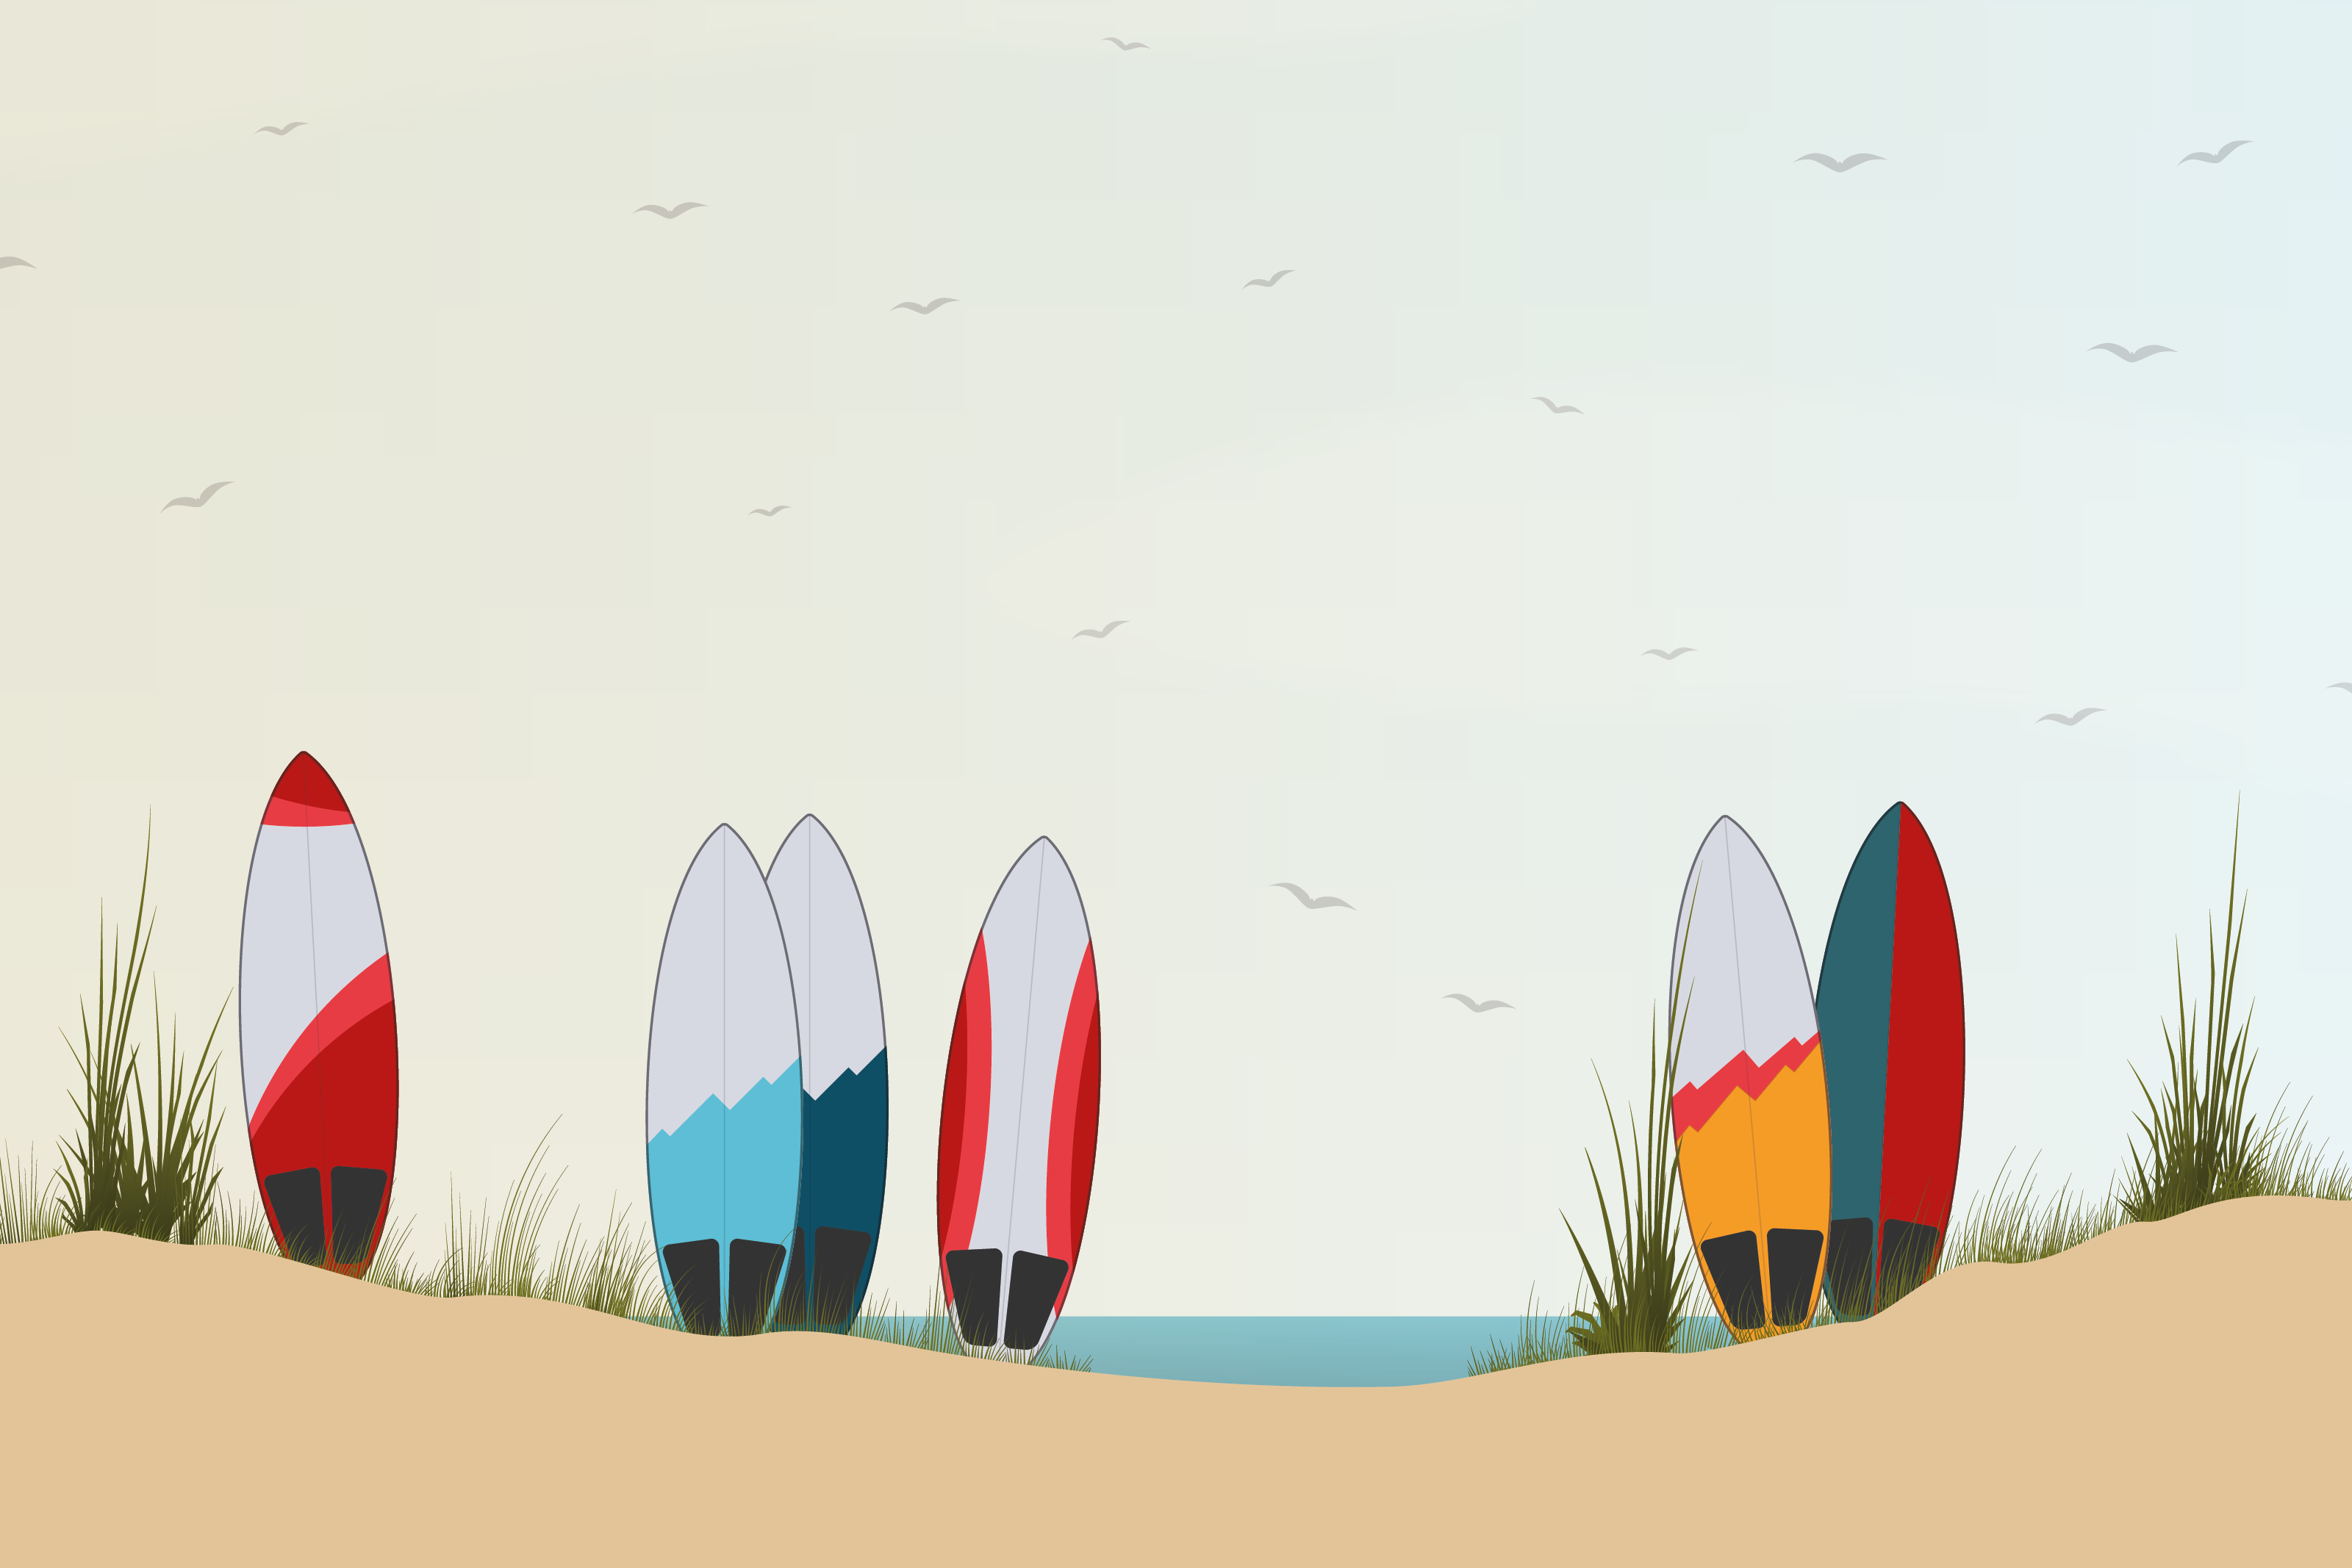 Beach and surf boards illustration by Xavier Wendling